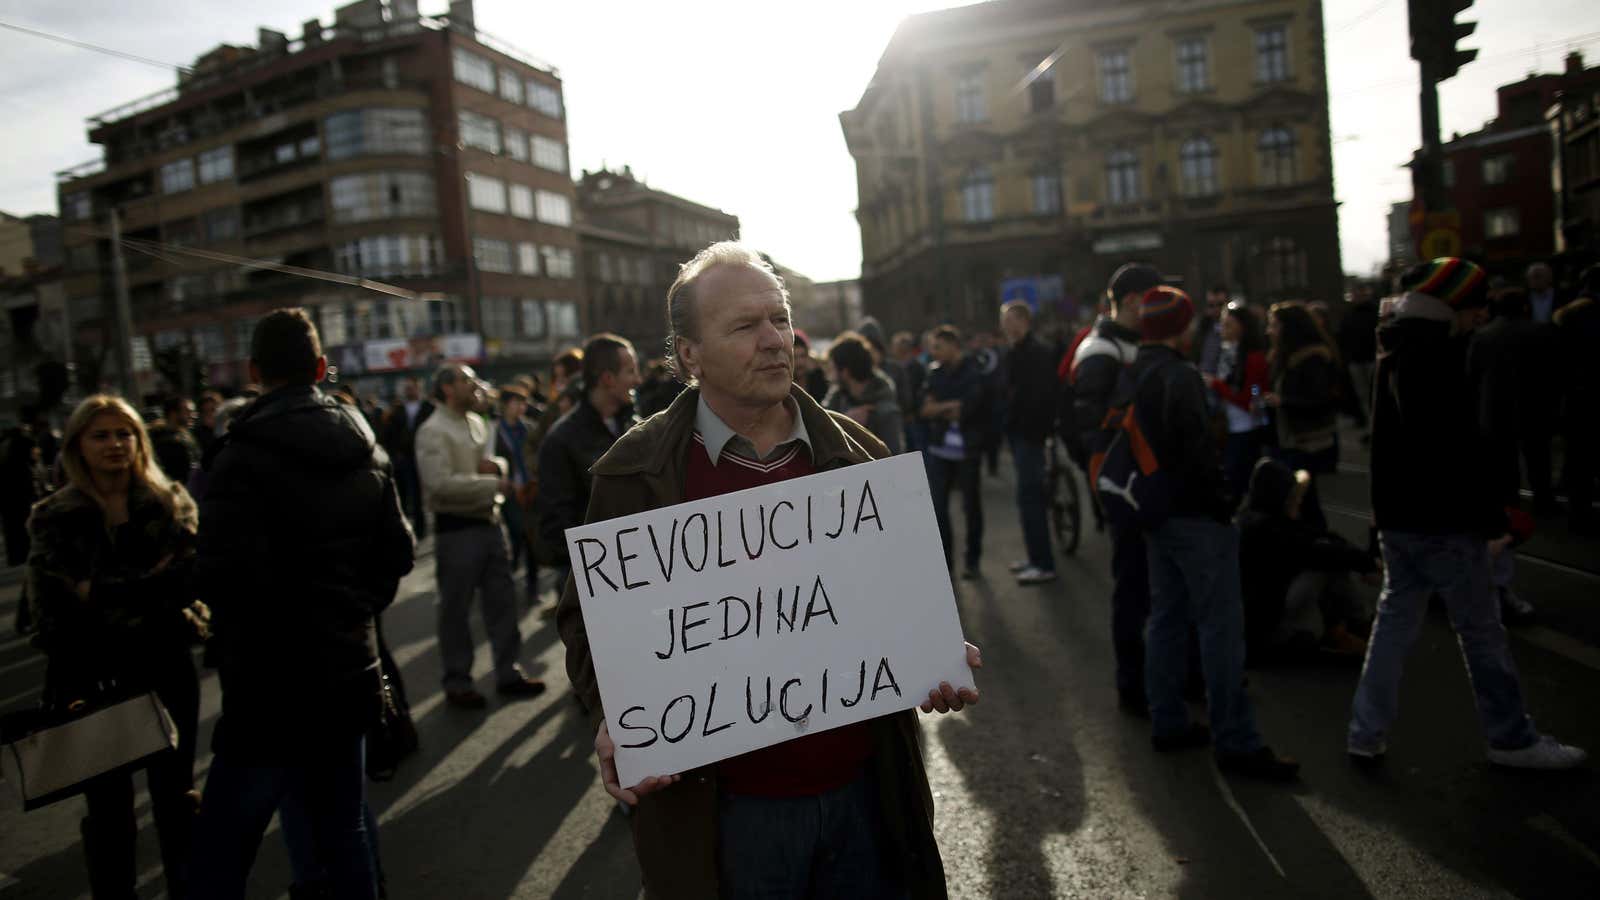 “Revolution is the only solution.” A placard from the 2014 protests.